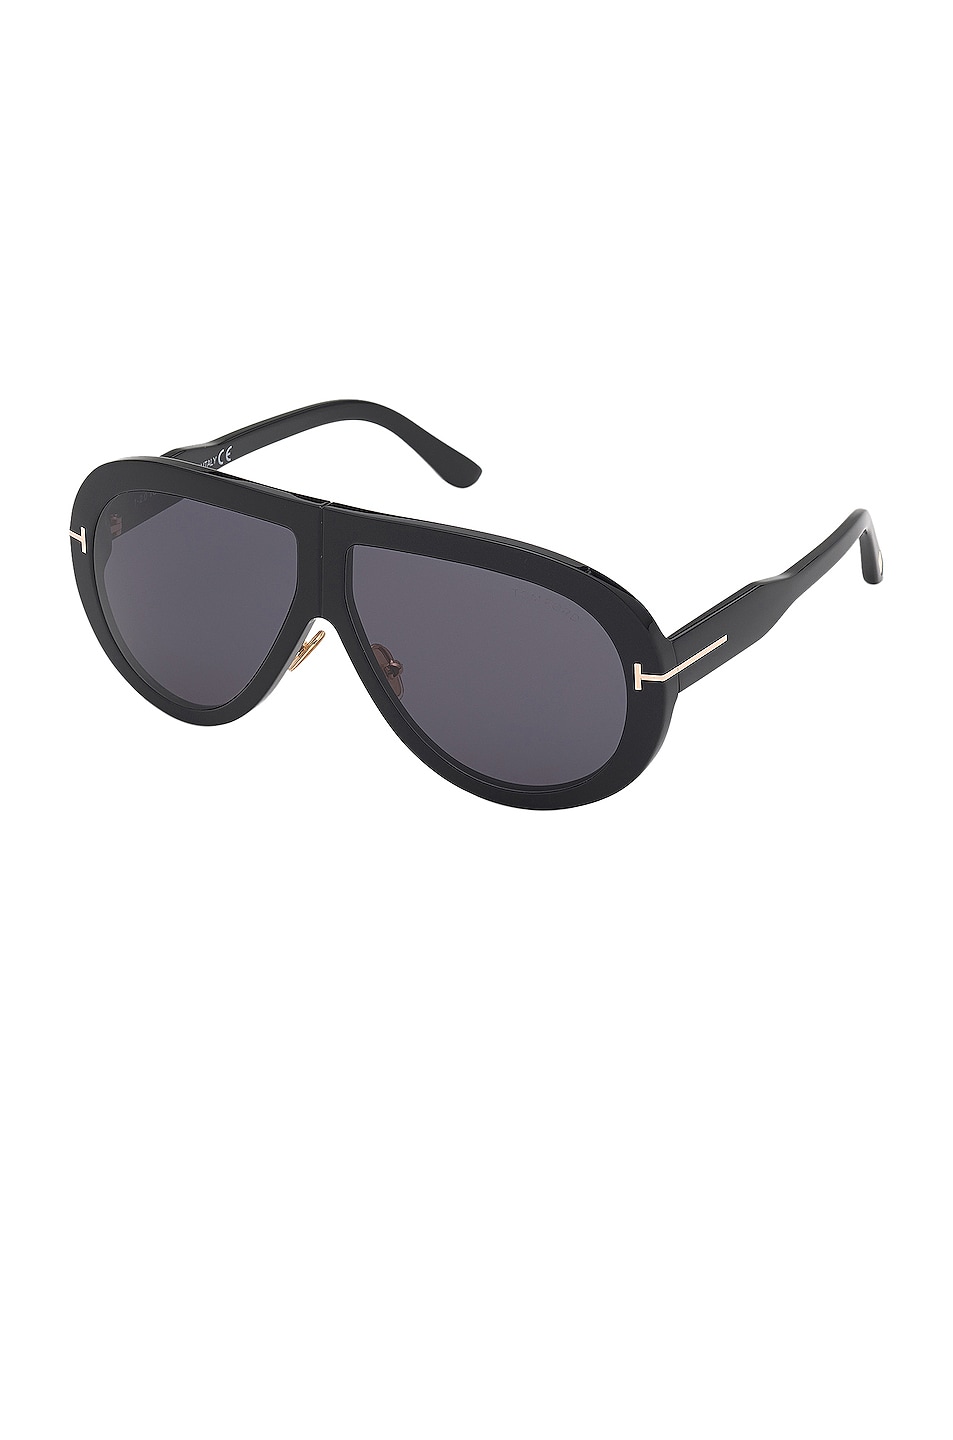 Image 1 of TOM FORD Troy Sunglasses in Shiny Black & Smoke Lens